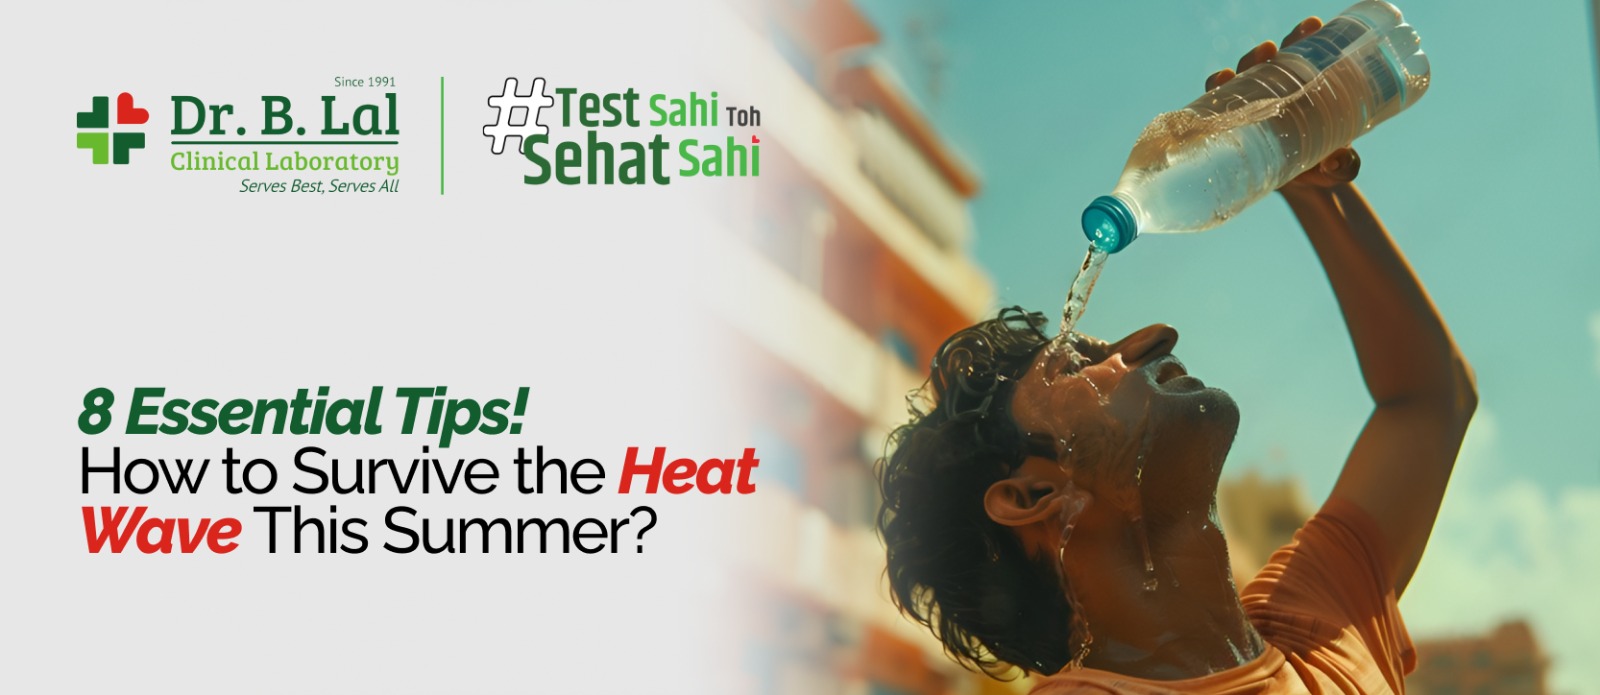 How to Survive the Heat Wave This Summer? 8 Essential Tips!